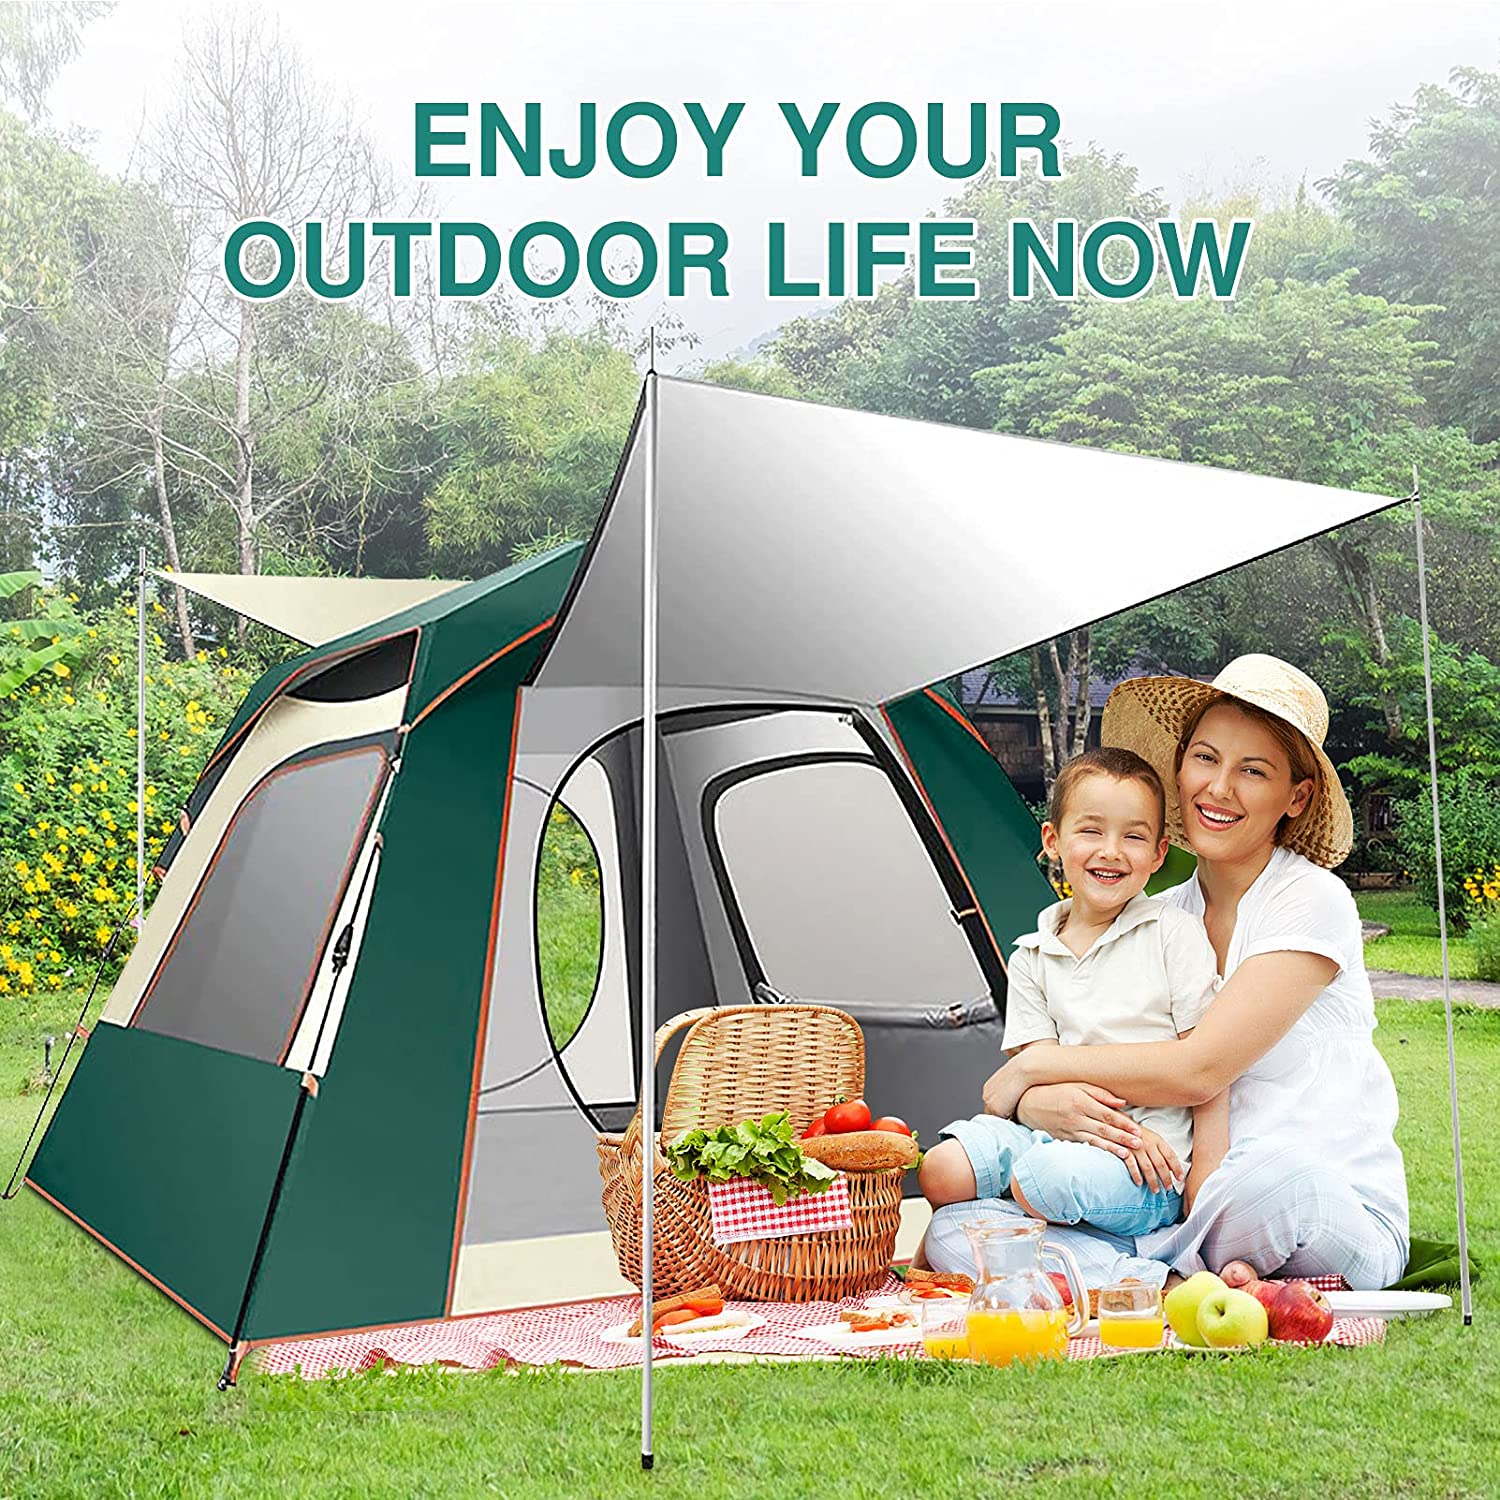 Pop Up Tents for Camping, 2/3/4/5 Person Family Cabin Tents, Waterproof, Double Layer, Big Tent for Outdoor,Picnic,Camping,Family,Friends Gathering - image 5 of 6